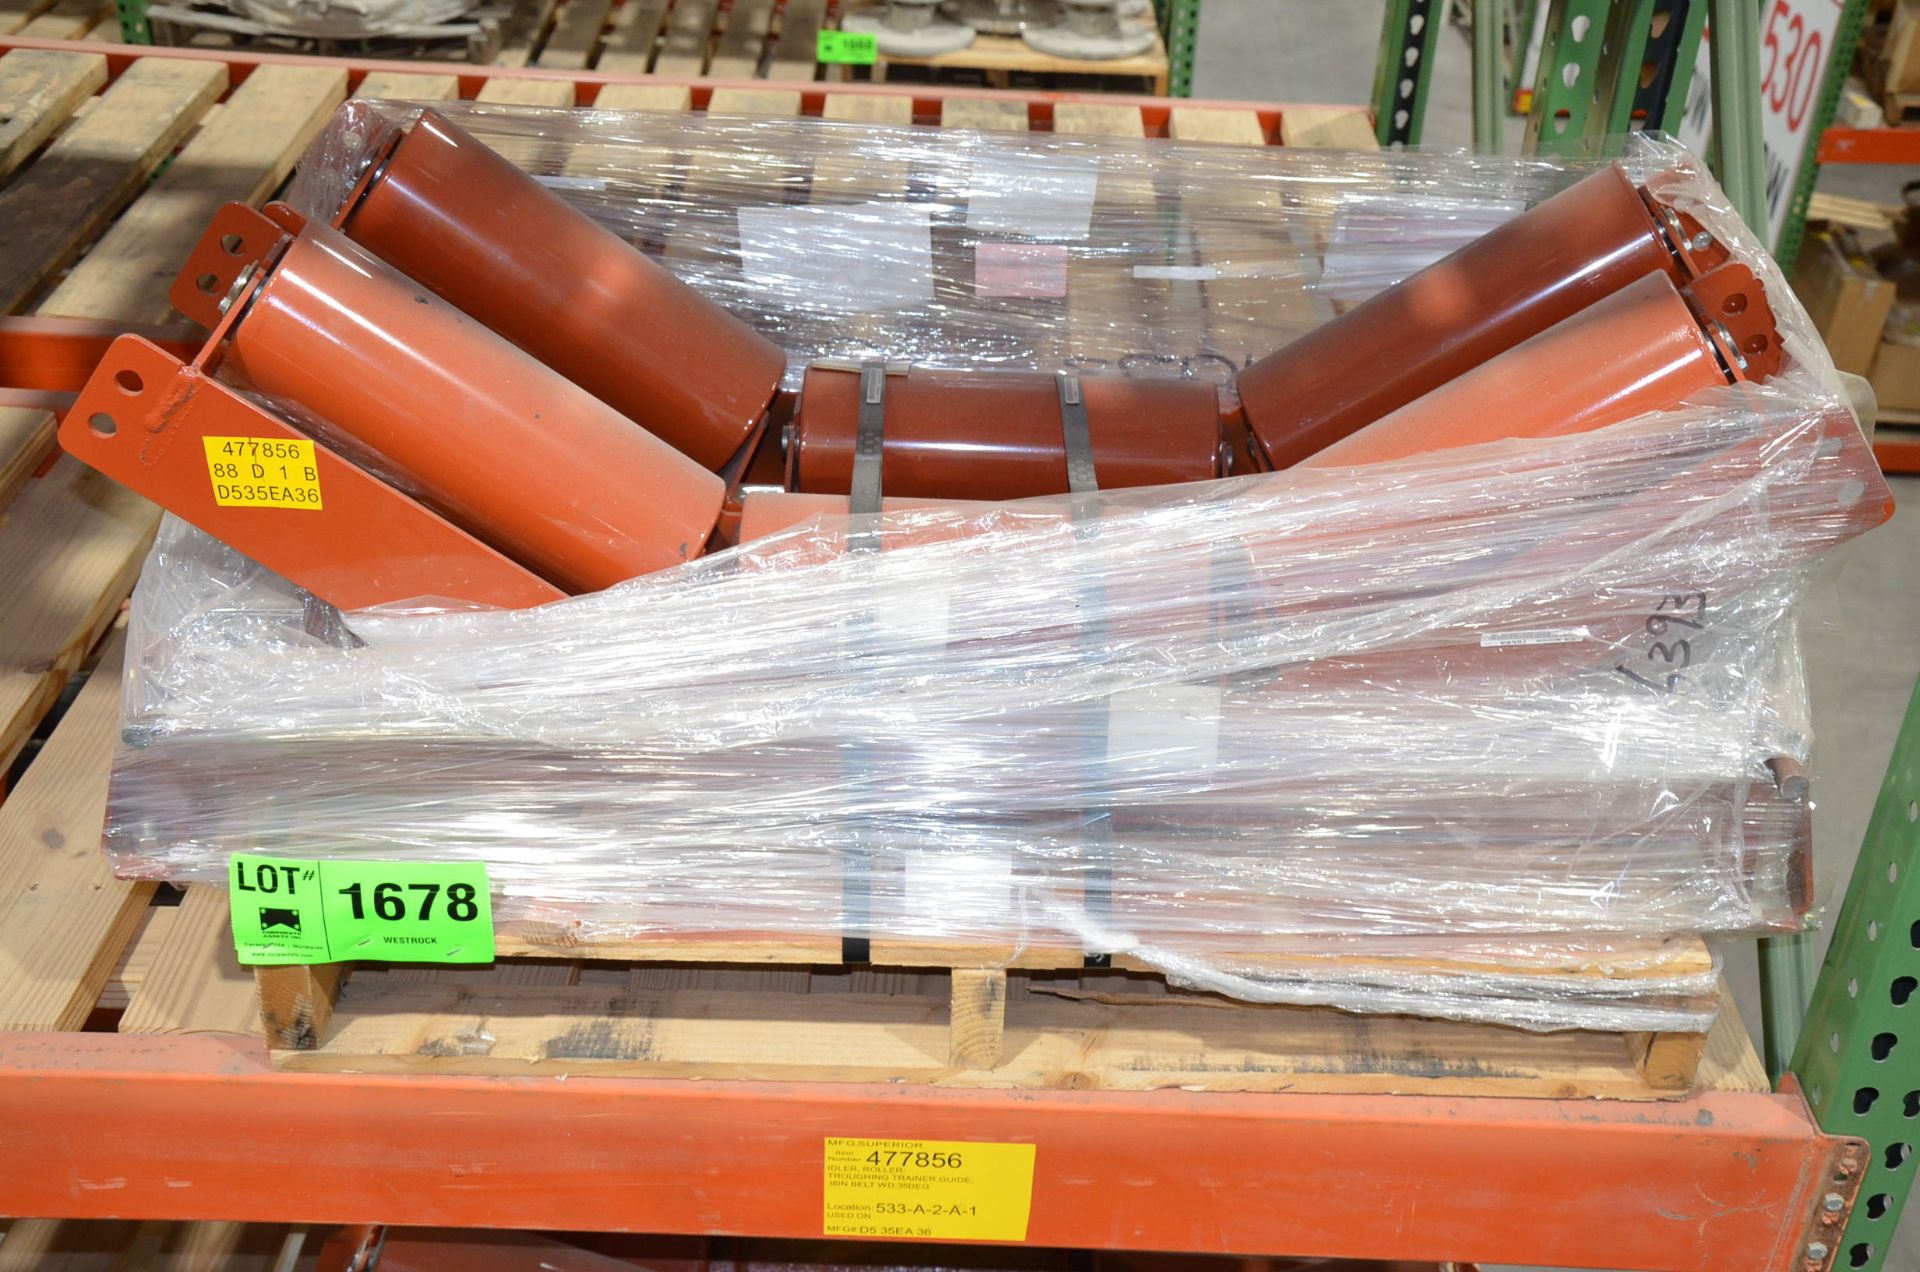 LOT/ SUPERIOR 36" W X 35 DEGREE TROUGHING CONVEYOR IDLER ROLLERS